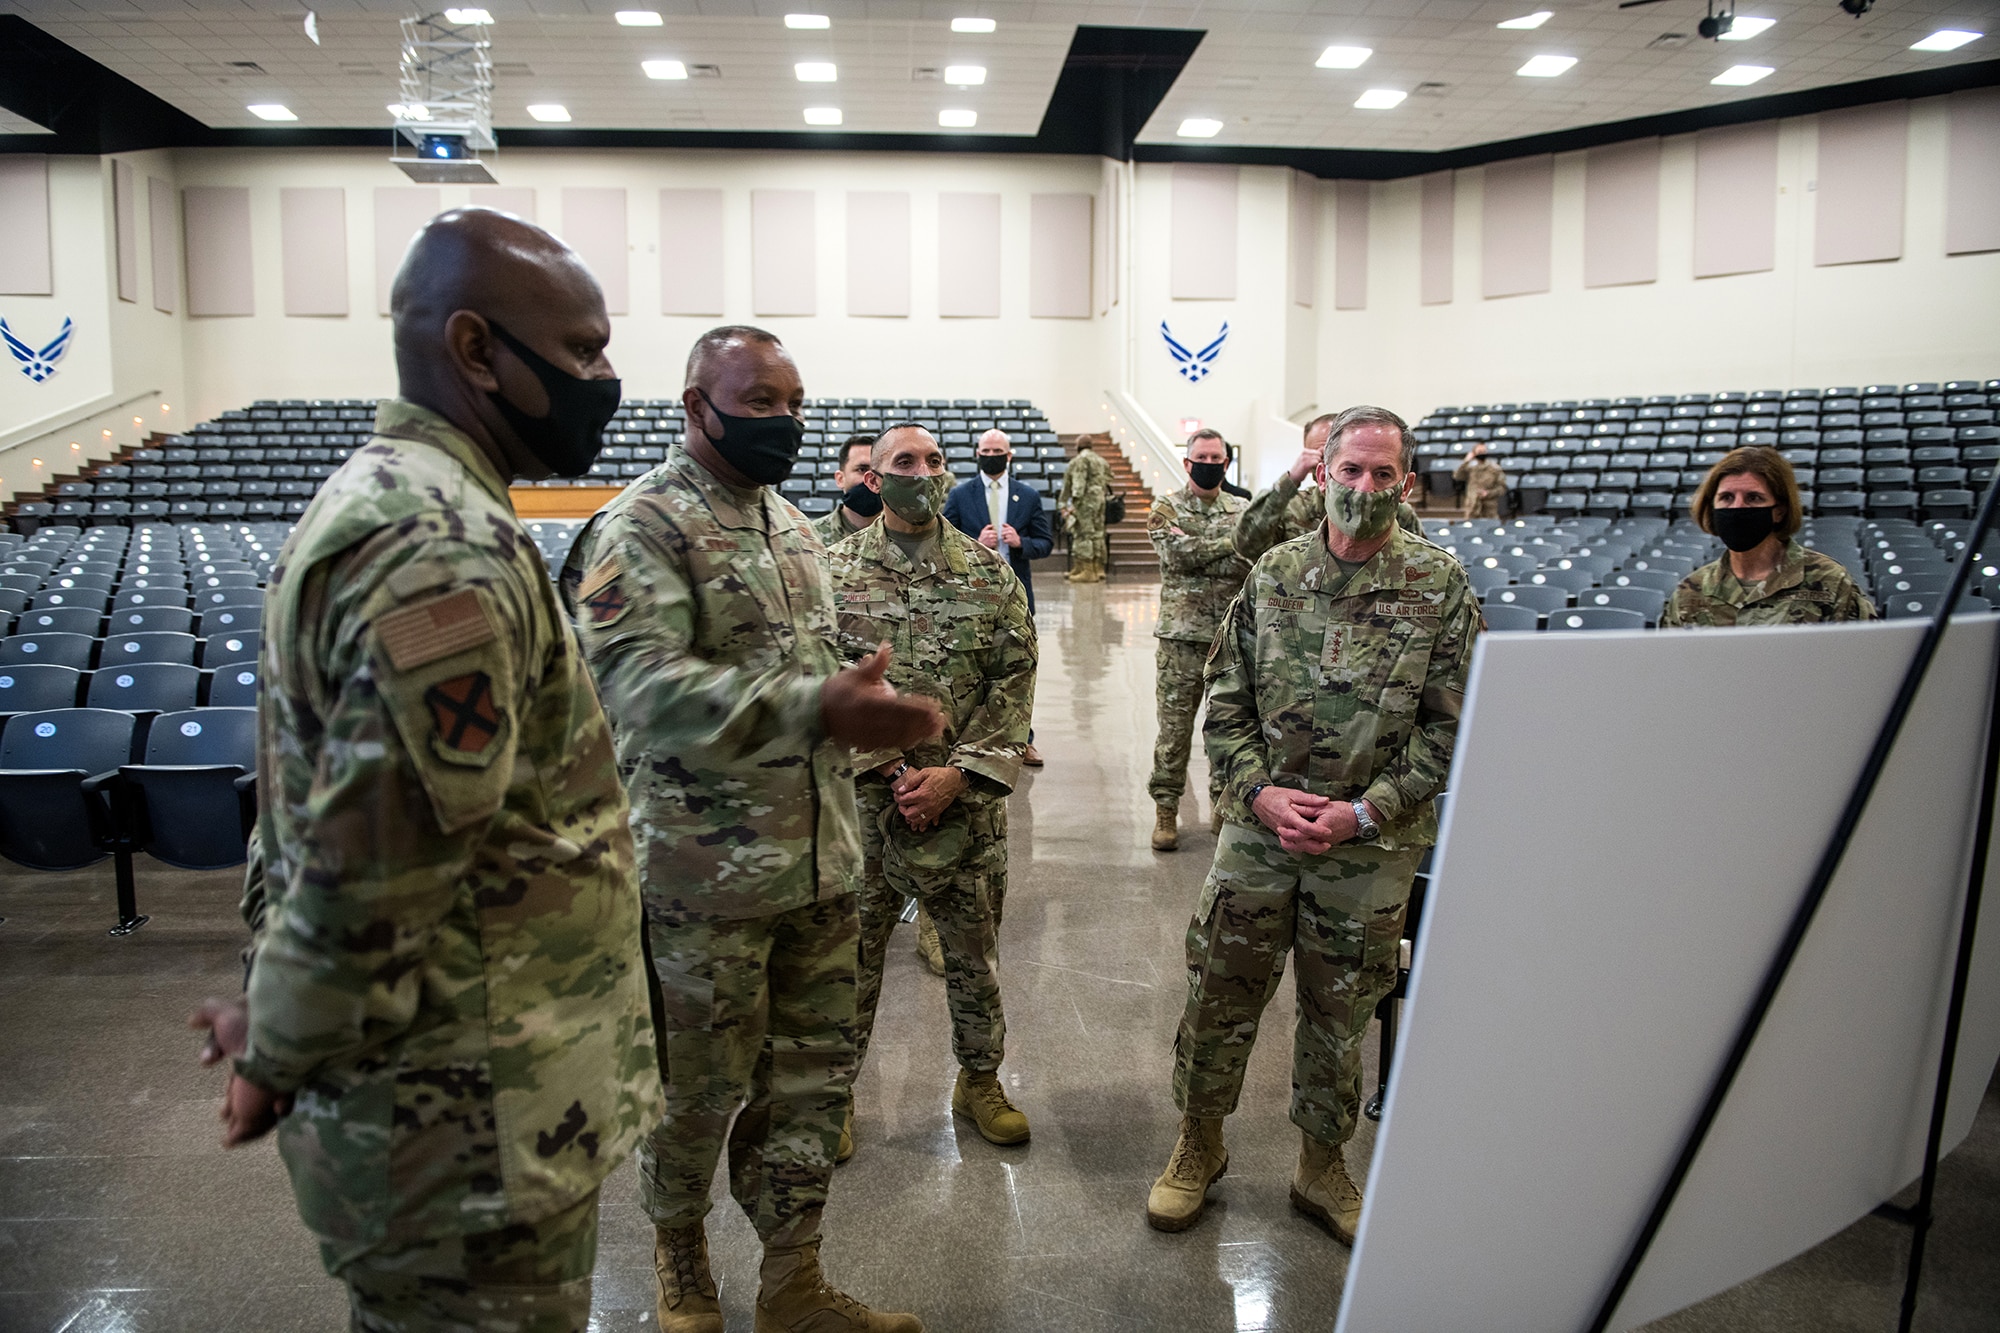 Air Force Chief of Staff Gen. David L. Goldfein (second from right) and Chief Master Sgt. Manny Pineiro (center), the service's first sergeant special duty manager, listen as Col. Michael Newsome, 737th Training Group and BMT commander, discusses current BMT COVID-19 mitigation procedures May 7, 2020, at the Pfingston Reception Center at Joint Base San Antonio-Lackland, Texas.